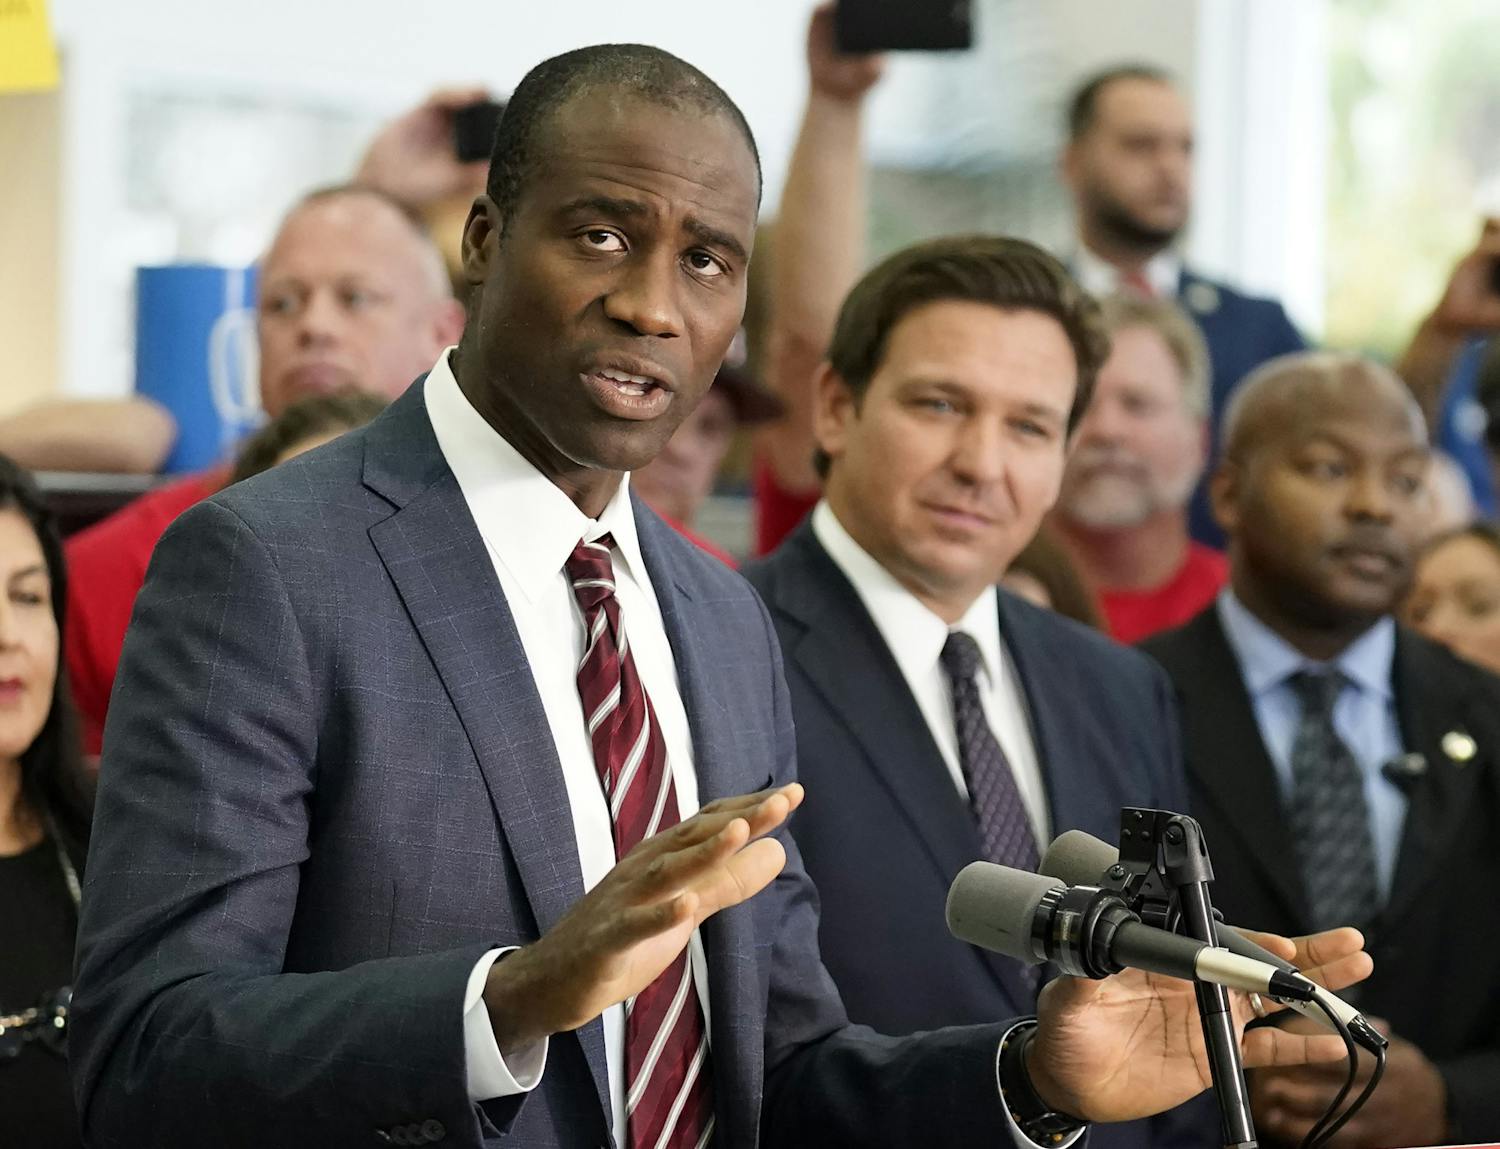 Florida Surgeon General Dr. Joseph Ladapo, front left, gestures as speaks to supporters and members of the media before a bill signing by Gov. Ron DeSantis, front right, Nov. 18, 2021, in Brandon, Fla. This week, Ladapo asked the state medical board to draft new policies that would likely restrict gender dysphoria treatments for transgender youth. (AP Photo/Chris O'Meara, File)